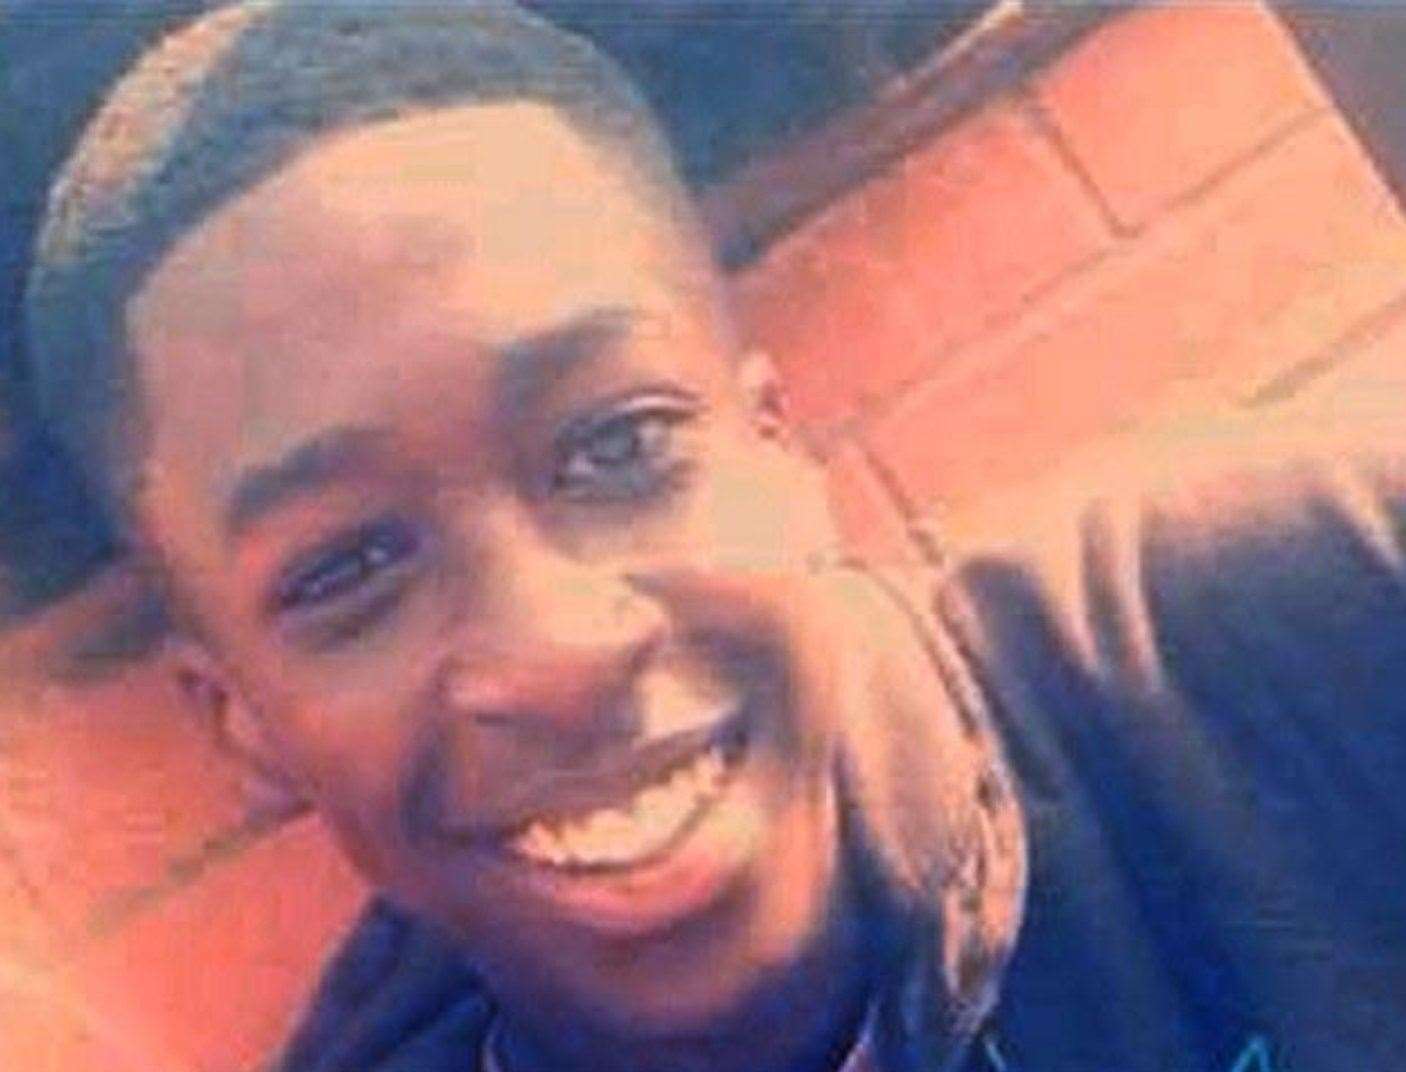 A 17-year-old has been charged with the murder of Jaydon McFarlane